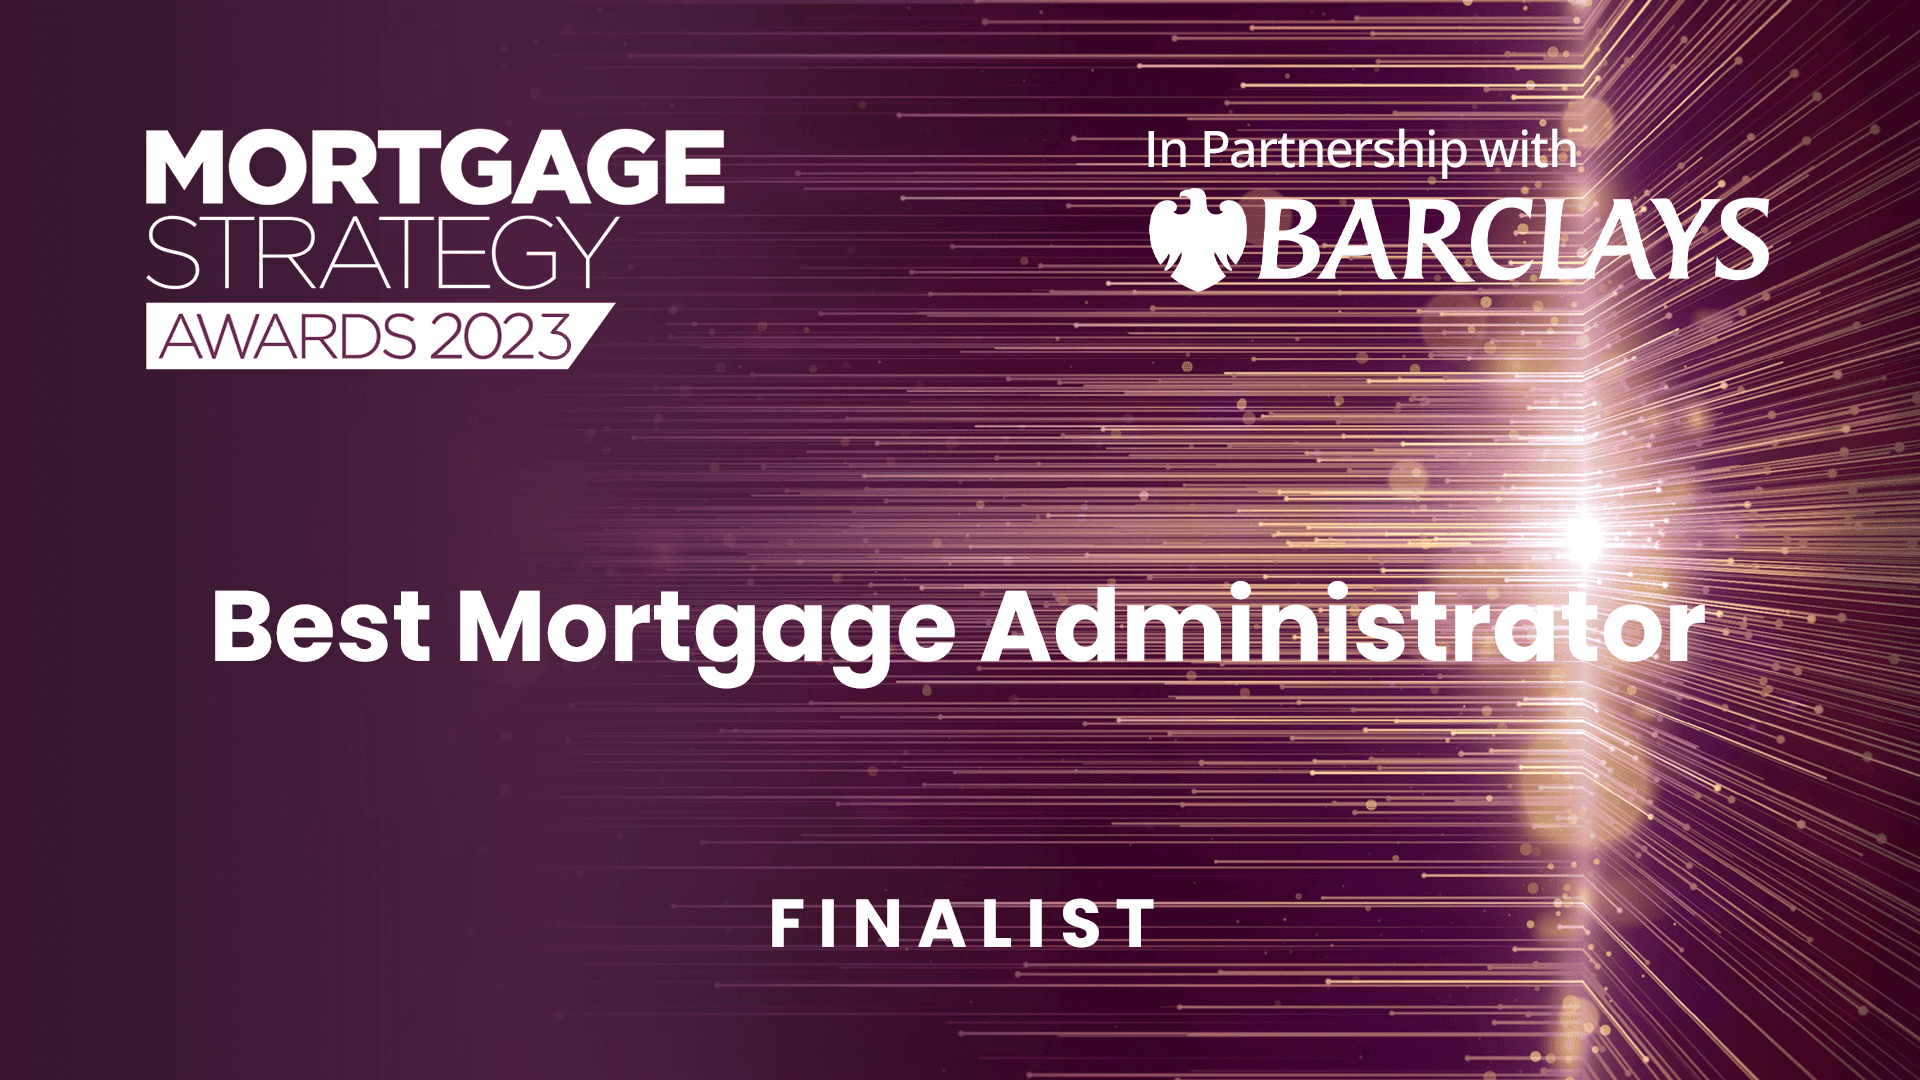 Finalist - Best Mortgage Administrator 2023